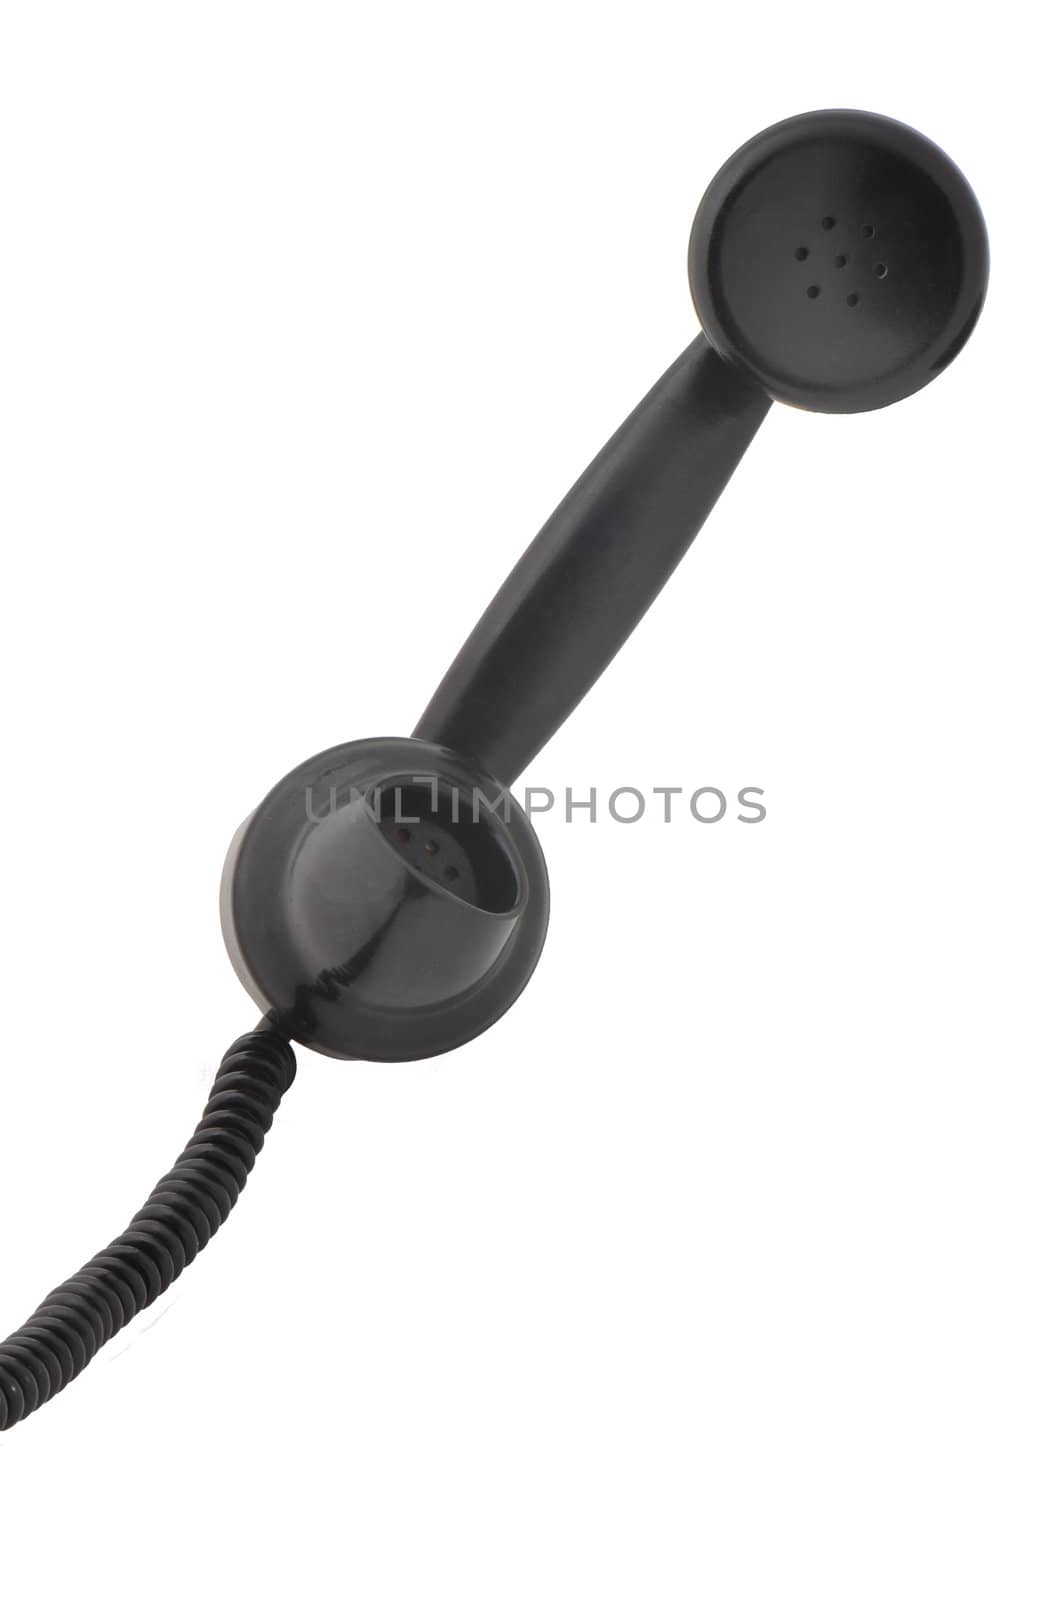 antique phone handset isolated on a white background